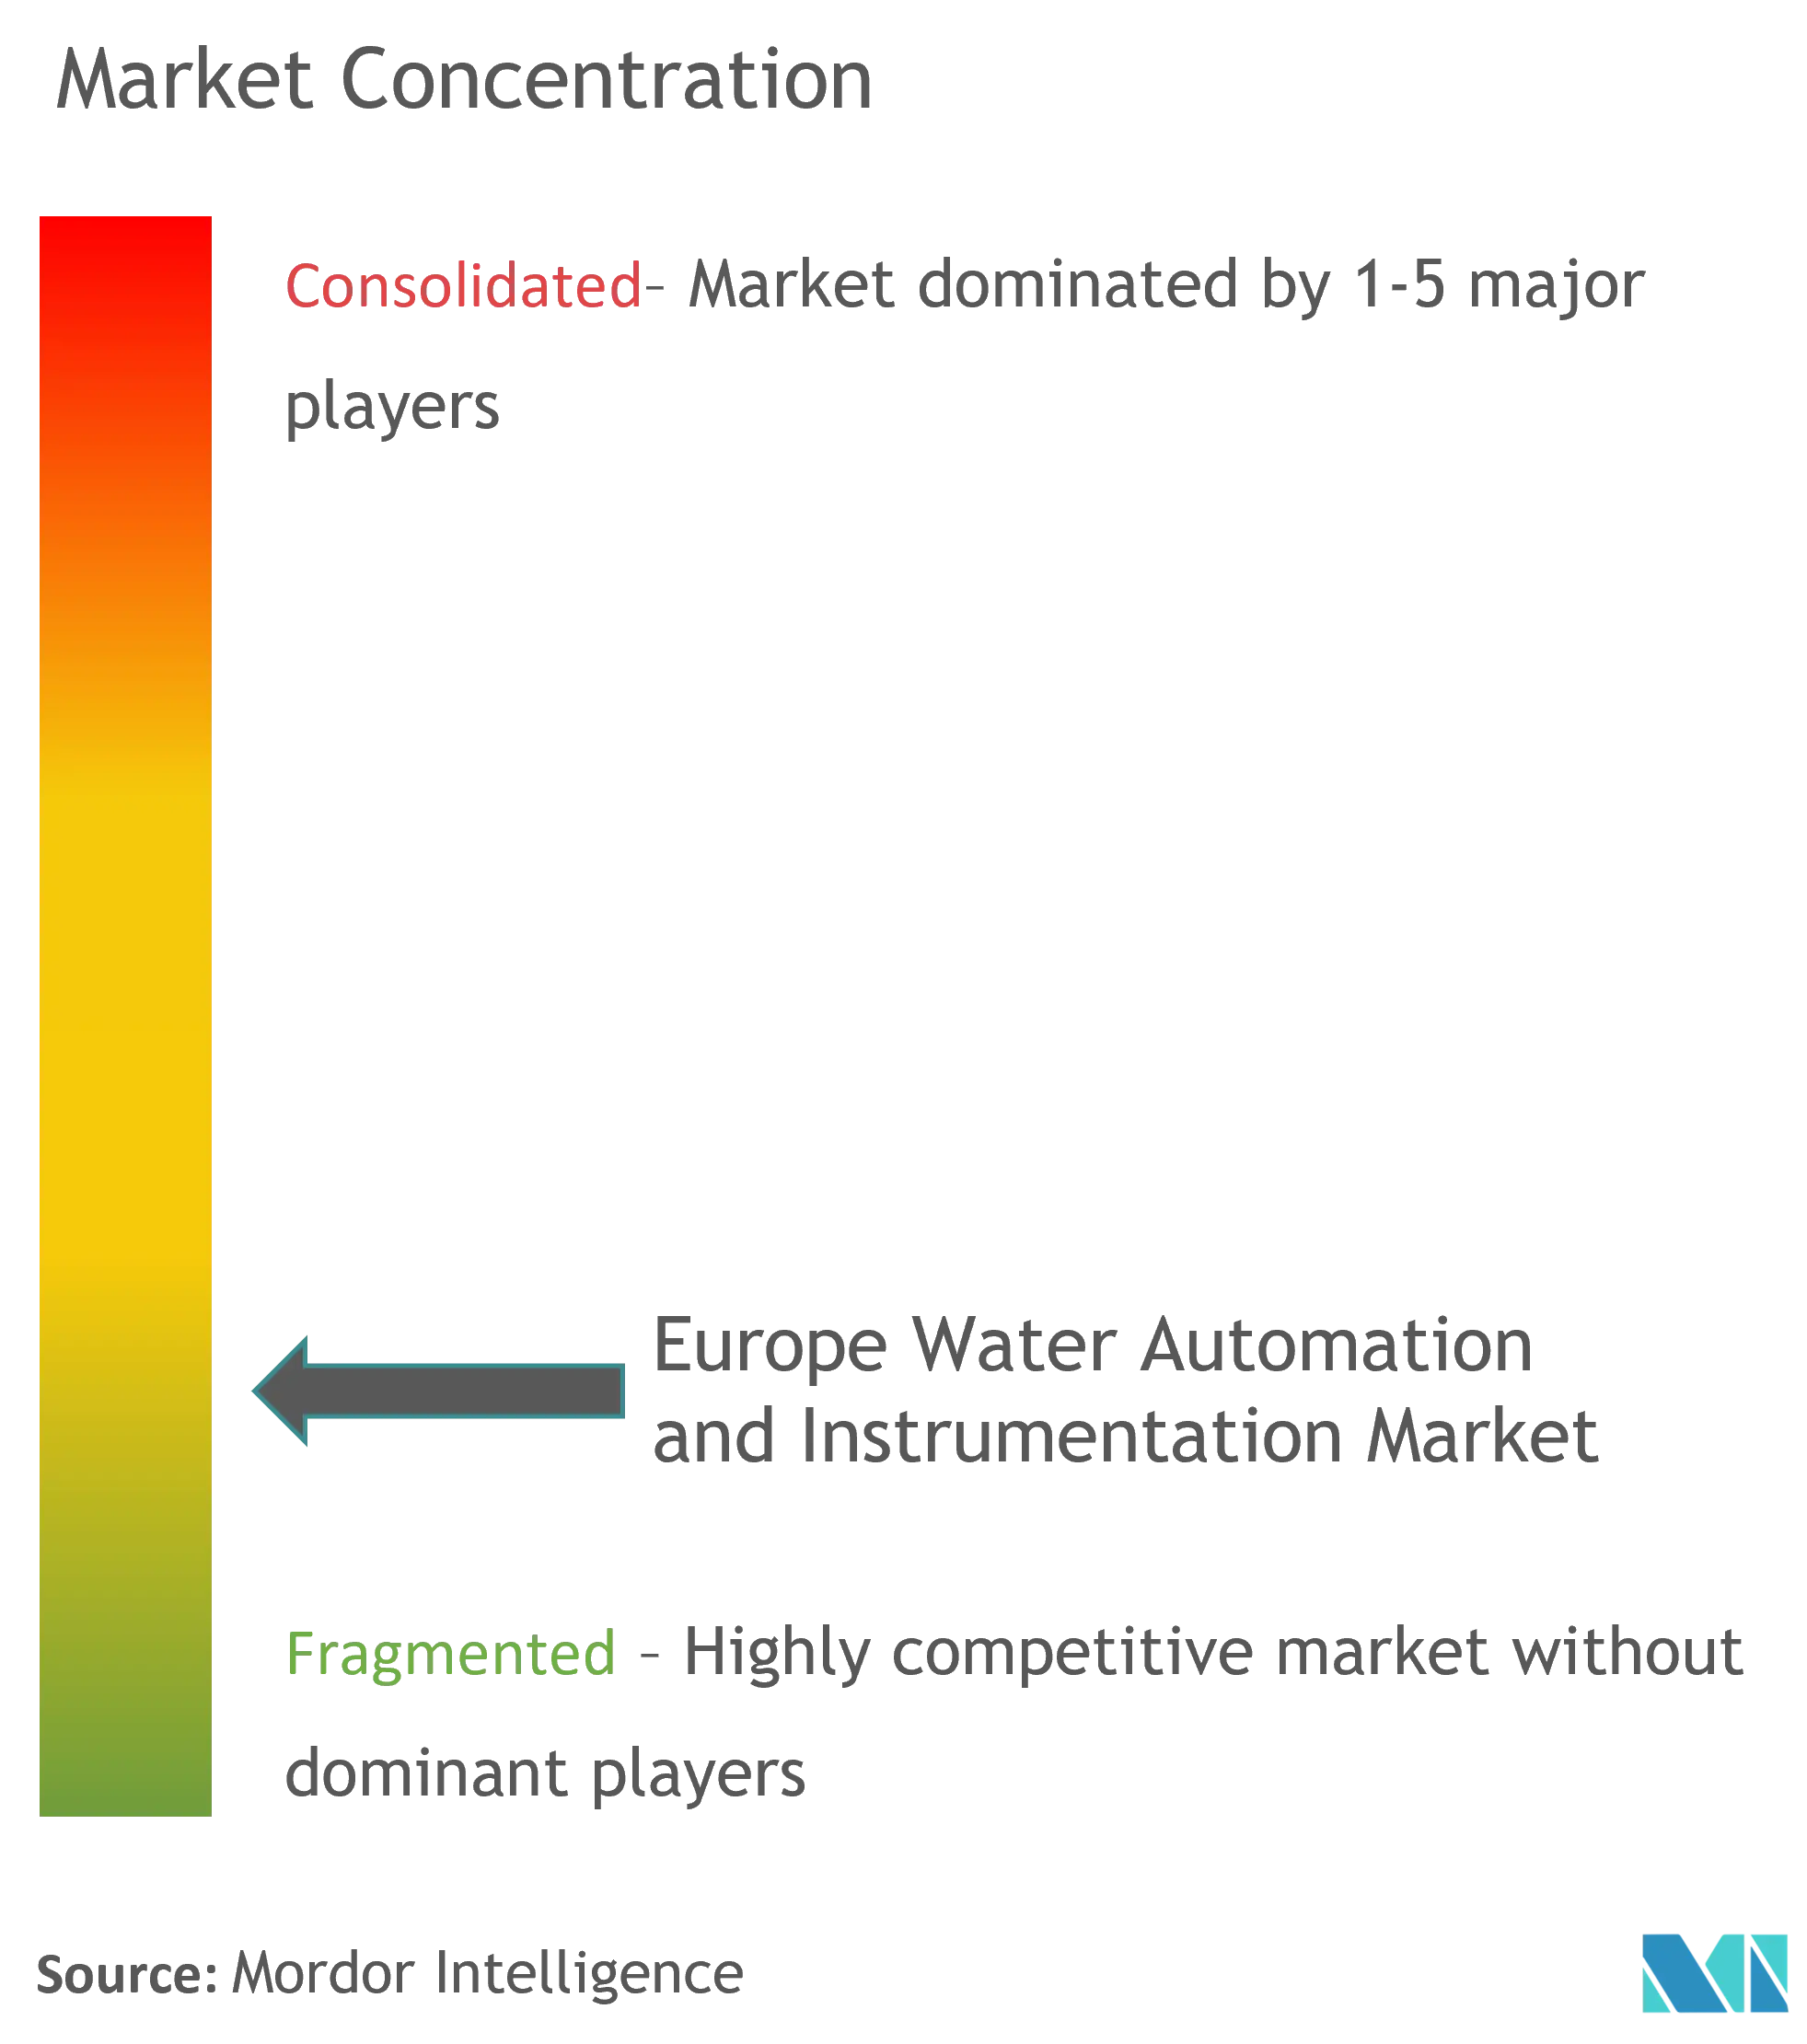 Europe Water Automation and Instrumentation Market Concentration